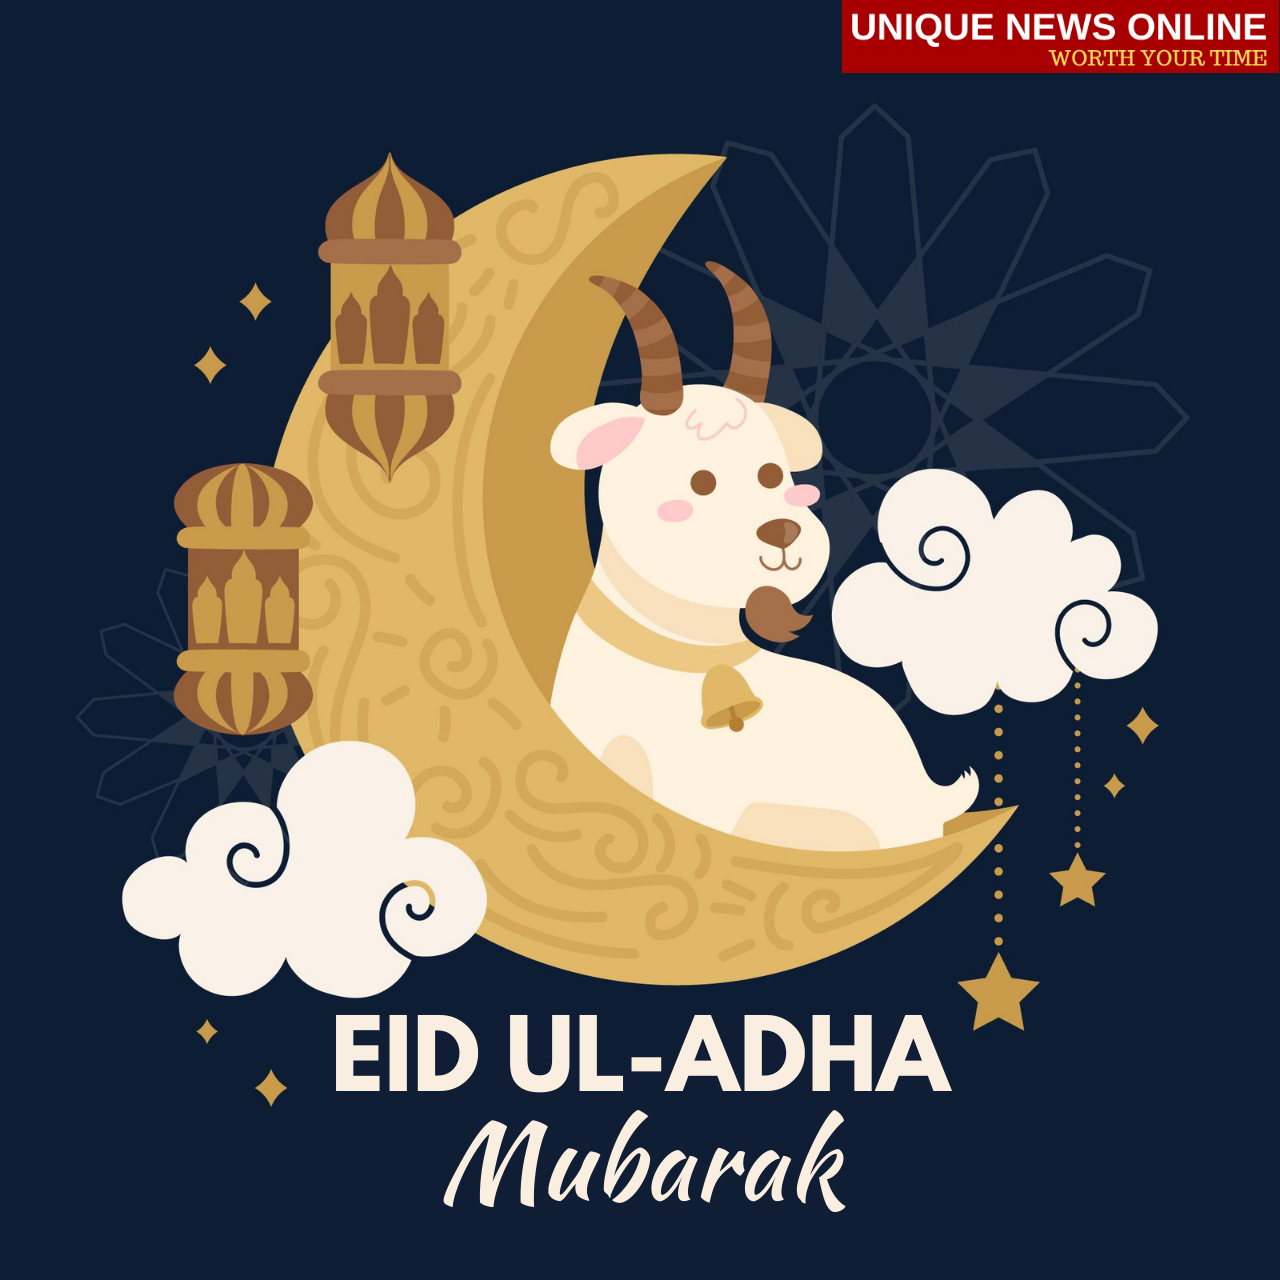 Eid ul-Adha Mubarak 2021 Arabic Wishes, Images, Quotes, Greetings, Status, Messages, and Dua to greet your Friend, Relative, or Loved Ones on Bakrid